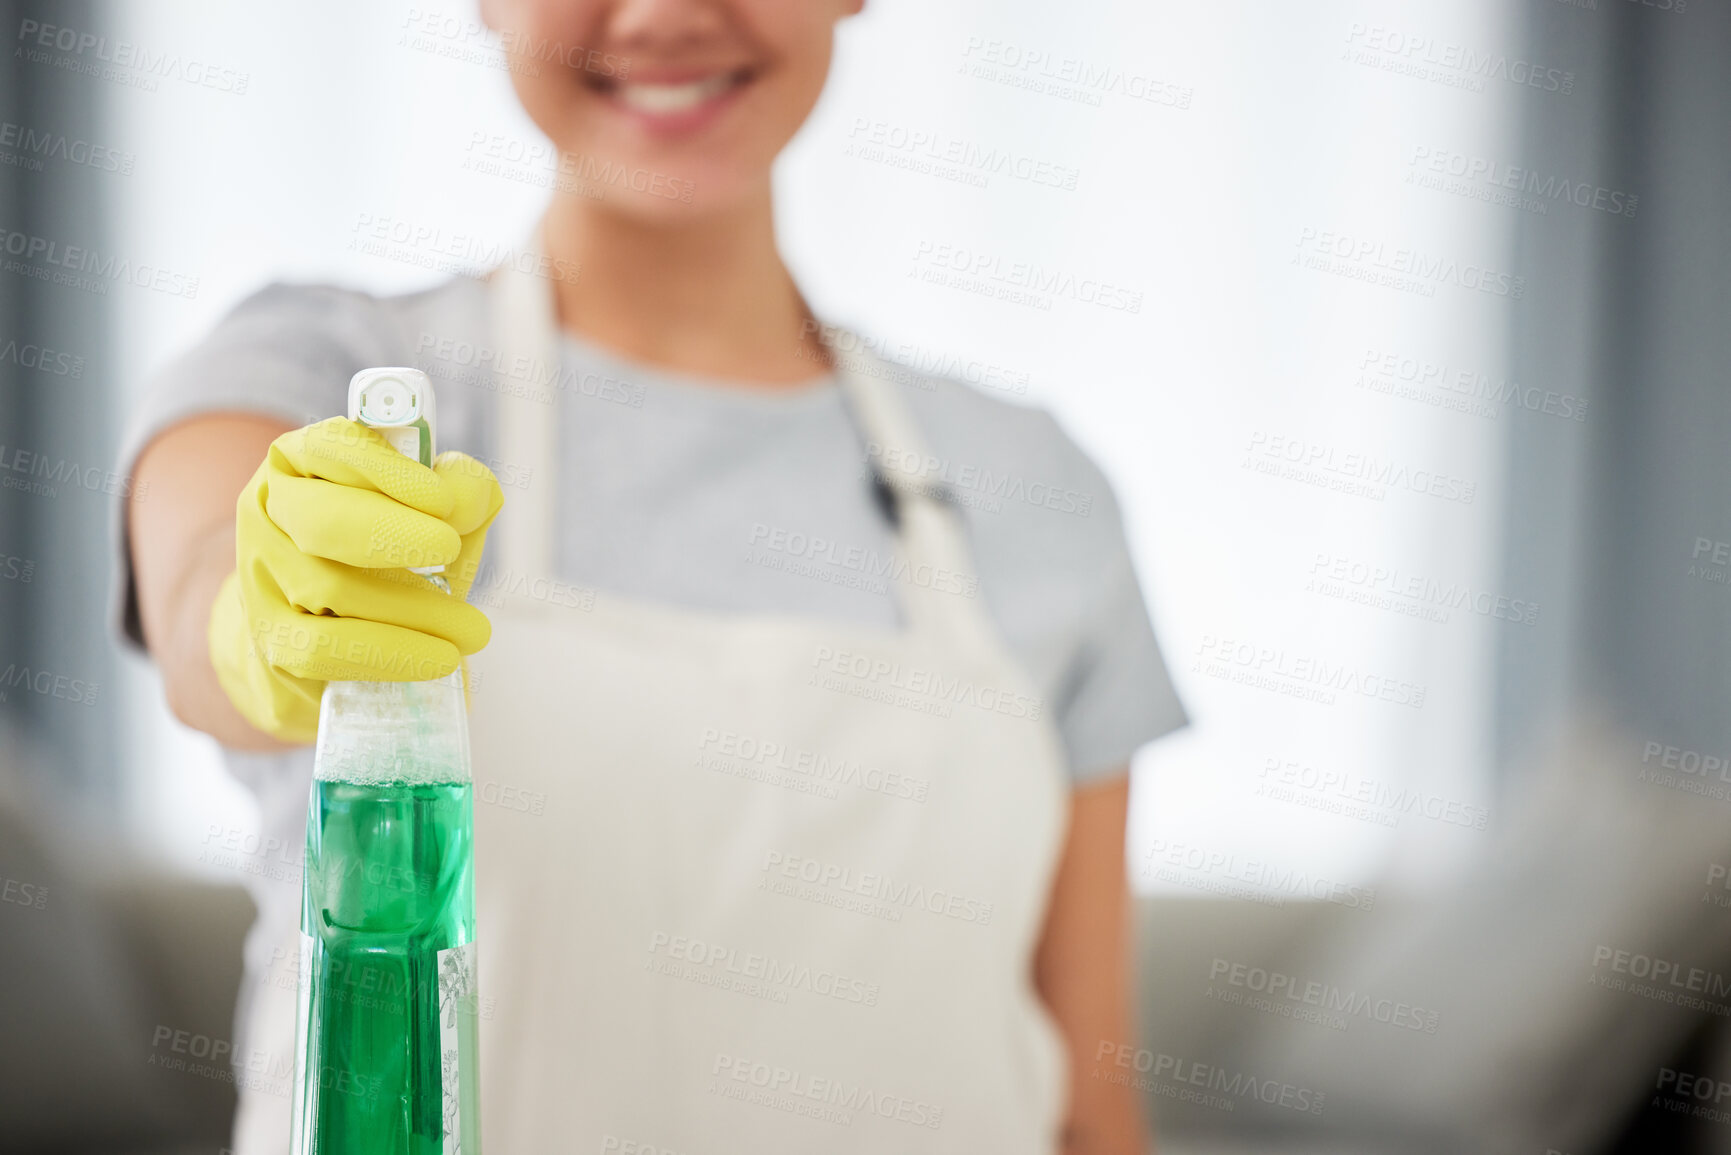 Buy stock photo Bottle, cleaning spray and woman with gloves to clean house, surface or job working with washing detergent. Cleaner, service and apartment maintenance with a maid, helper or worker with products